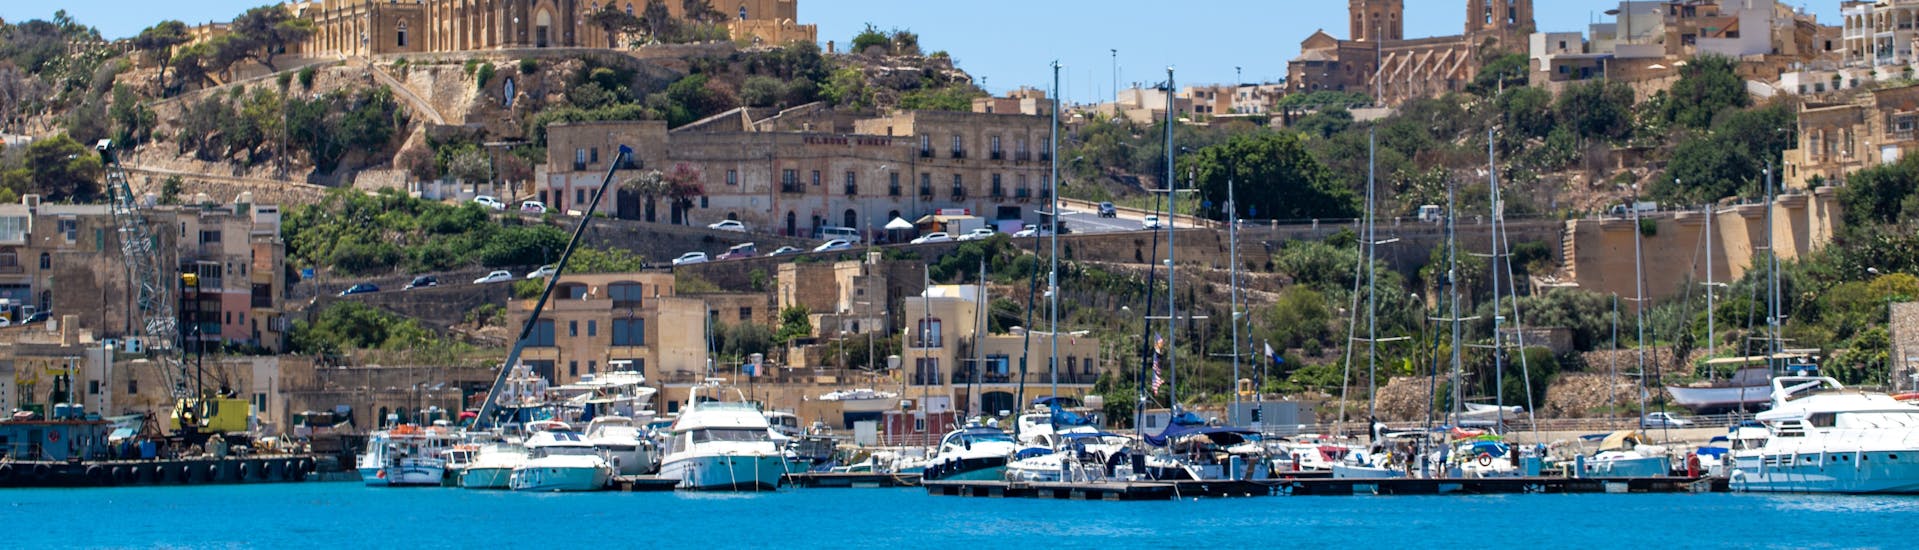 View of Gozo from the boat during the Boat Trip to Gozo, Comino & St Paul's Islands with Mermaid Cruises Malta.